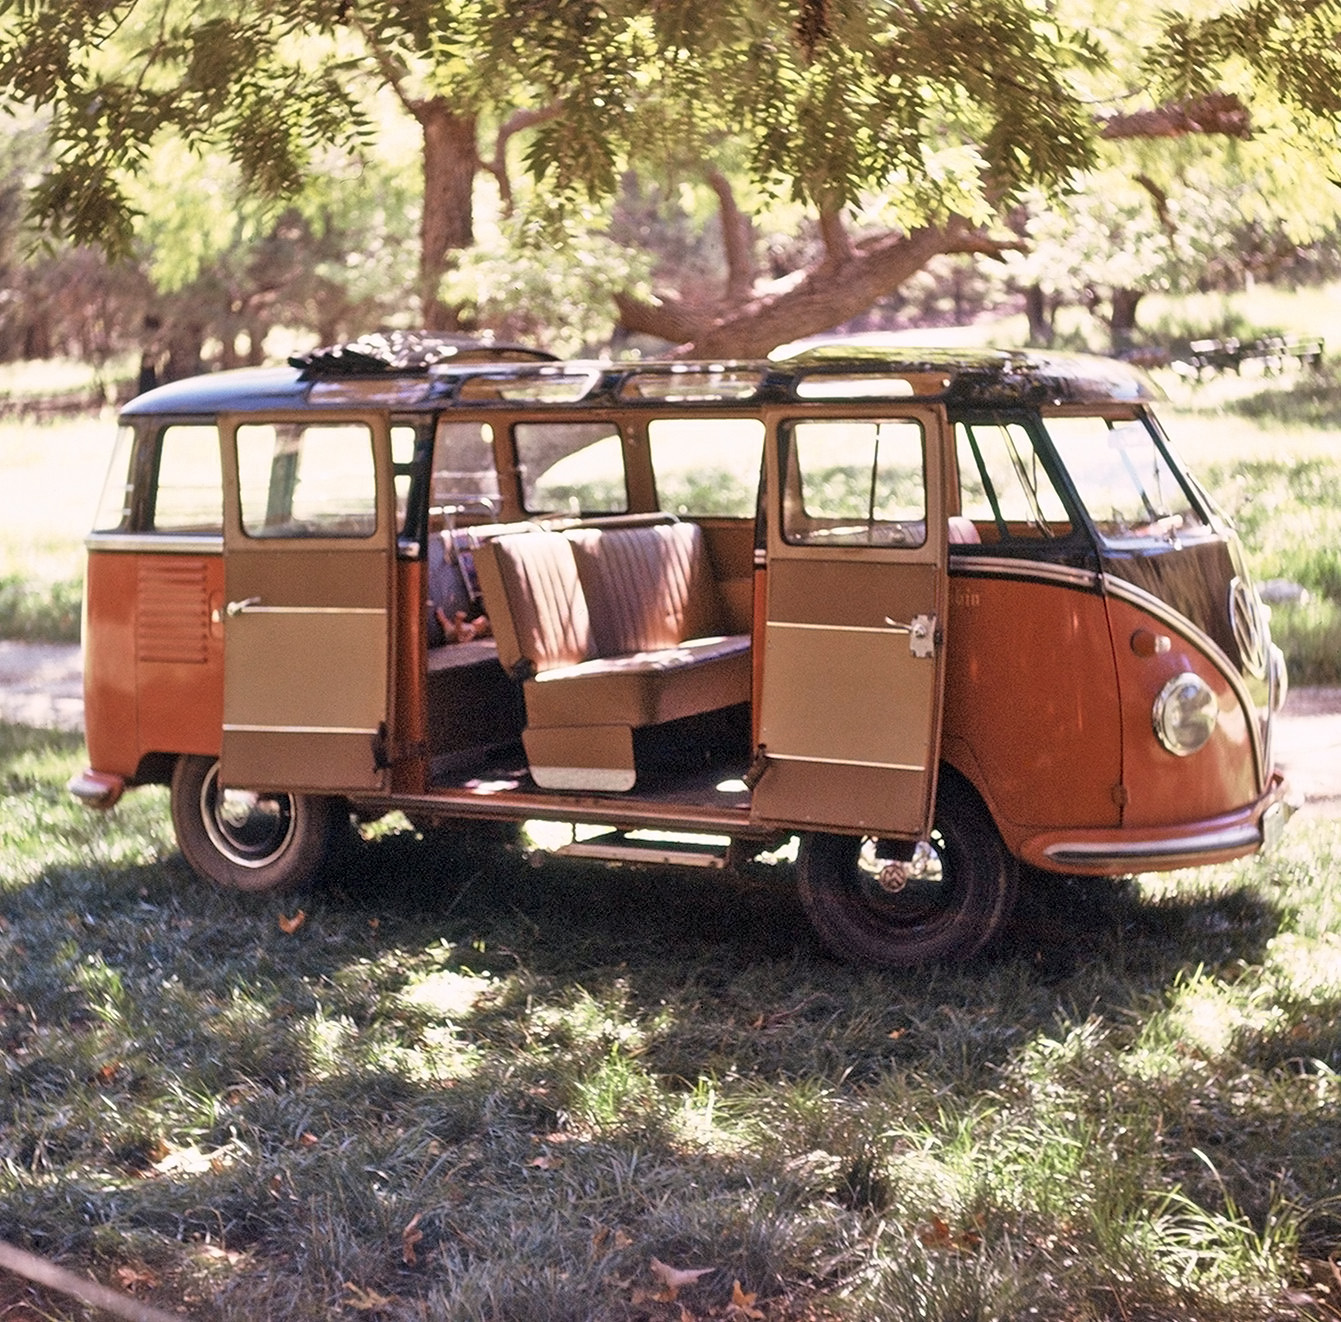 Volkswagen camper on a picnic, Garden Canyon, Fort Huachuca, Arizona, summer 1962. This was a beautiful vehicle for exploring around Fort Huachuca and Sierra Vista, Arizona. View full size.